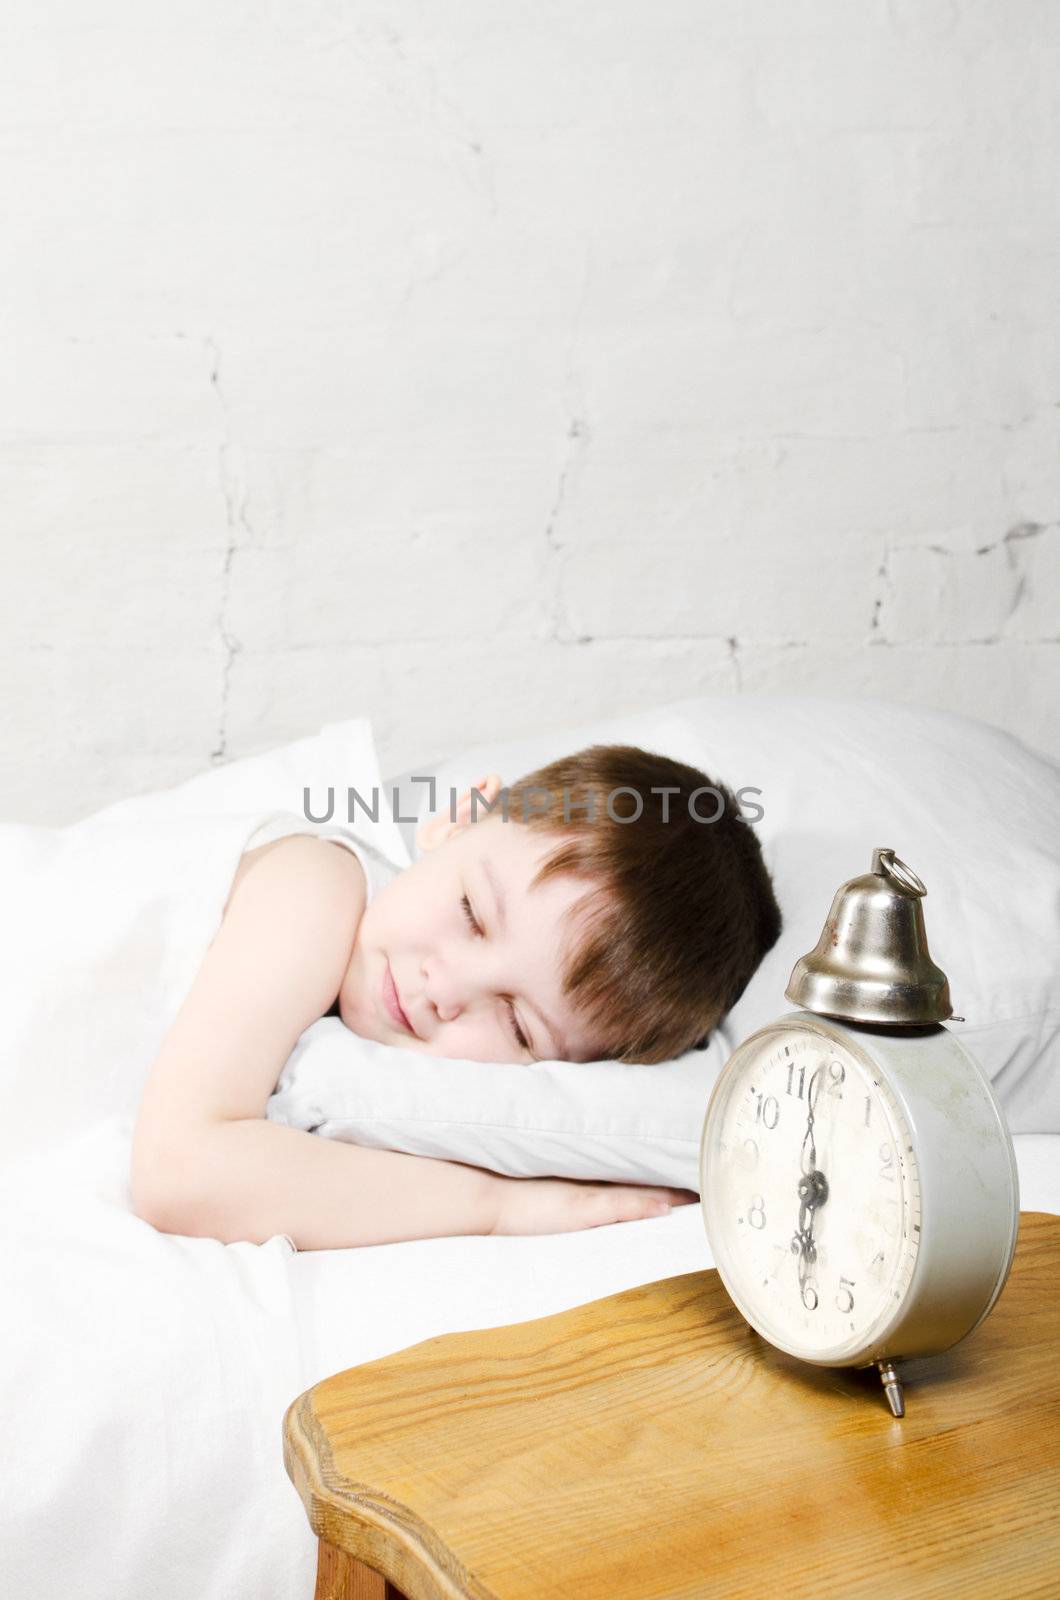 Small toddler boy (4 years) is sleeping in bed. Brick wall at the background. Old clock show 6 o'clock.